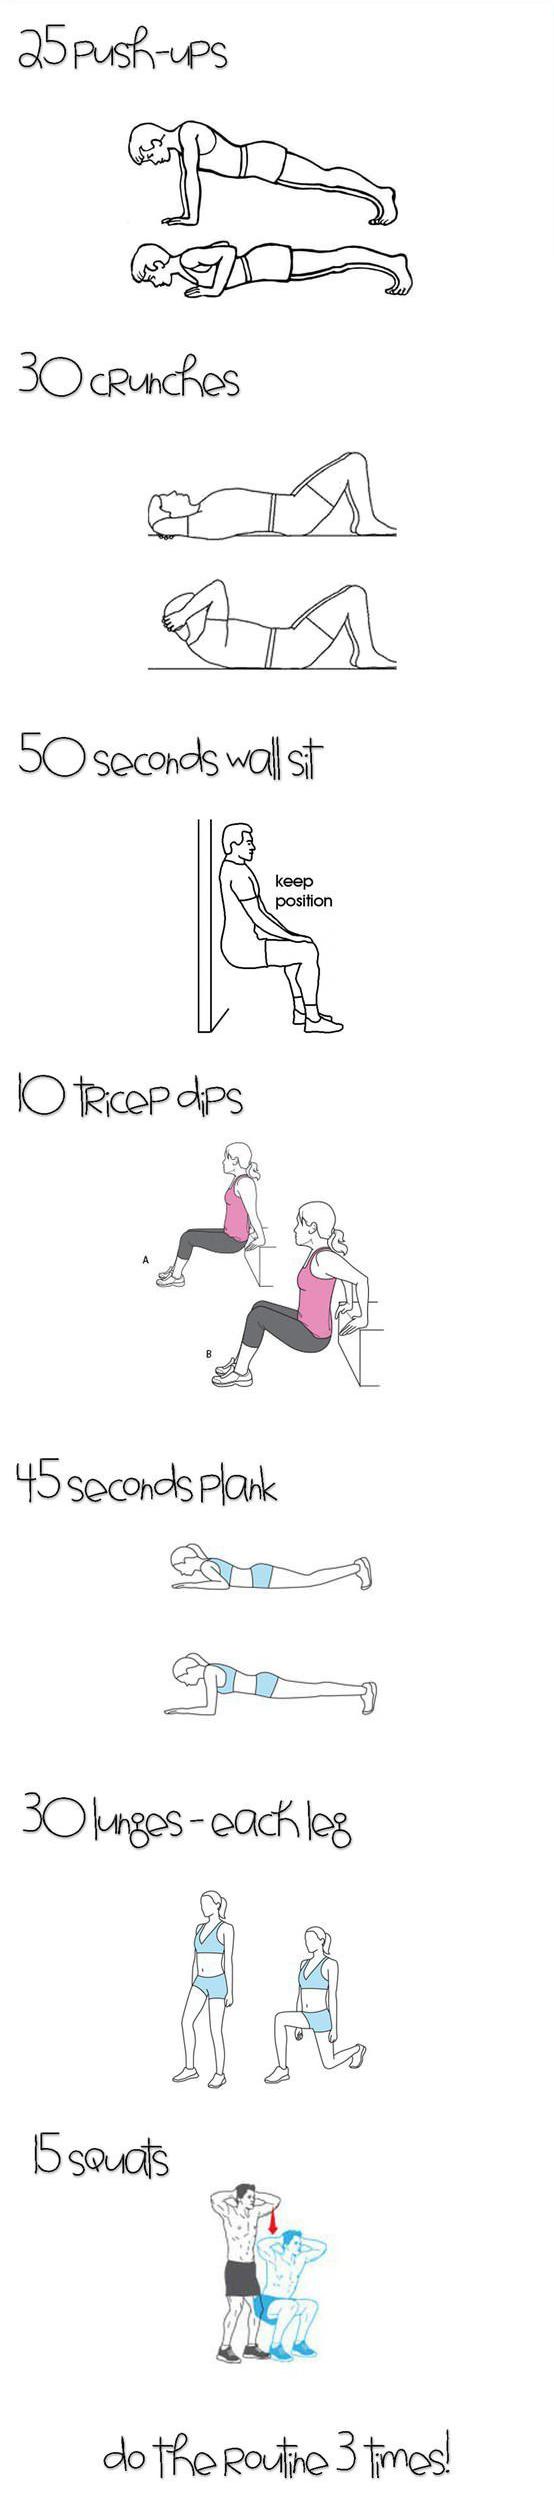 Lose Weight With This Morning Workouts